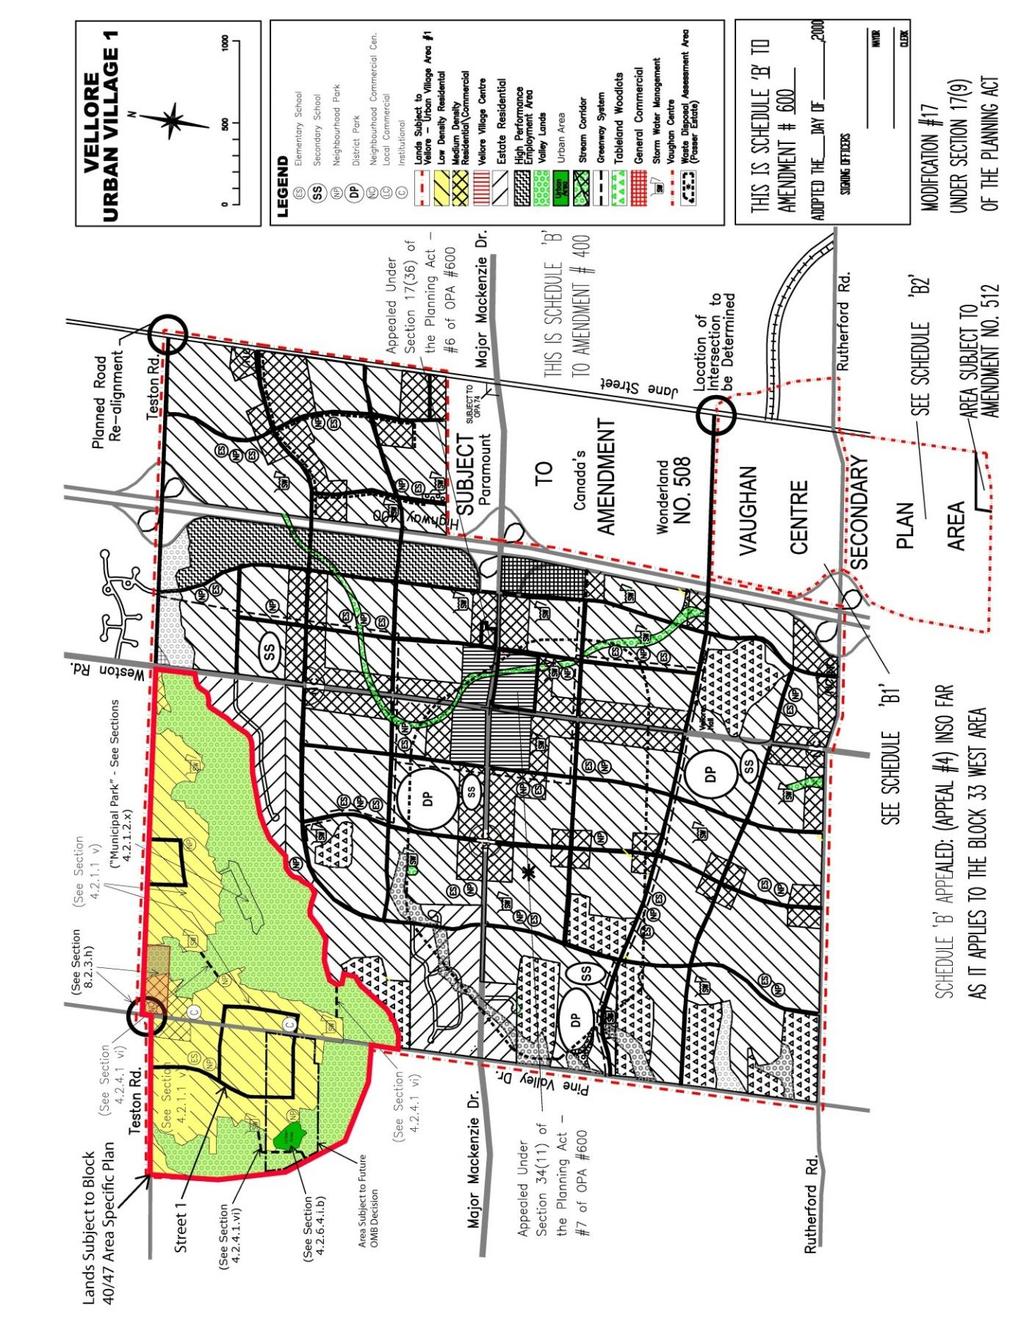 established through the approval of the Block 40/47 Block Plan and Draft Plans of